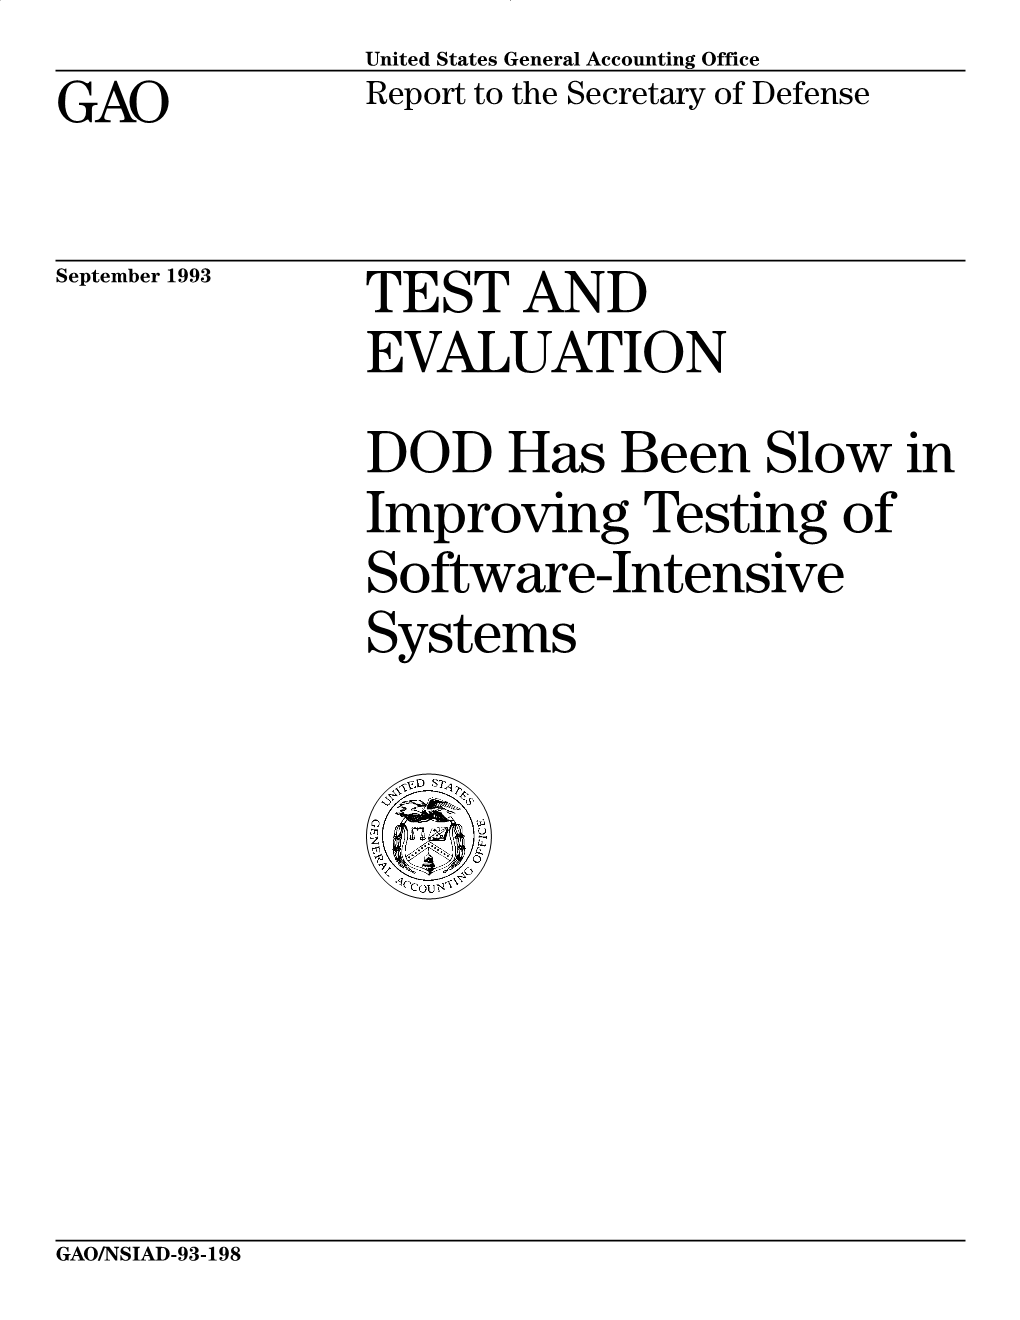 TEST and EVALUATION: DOD Has Been Slow in Improving Testing Of